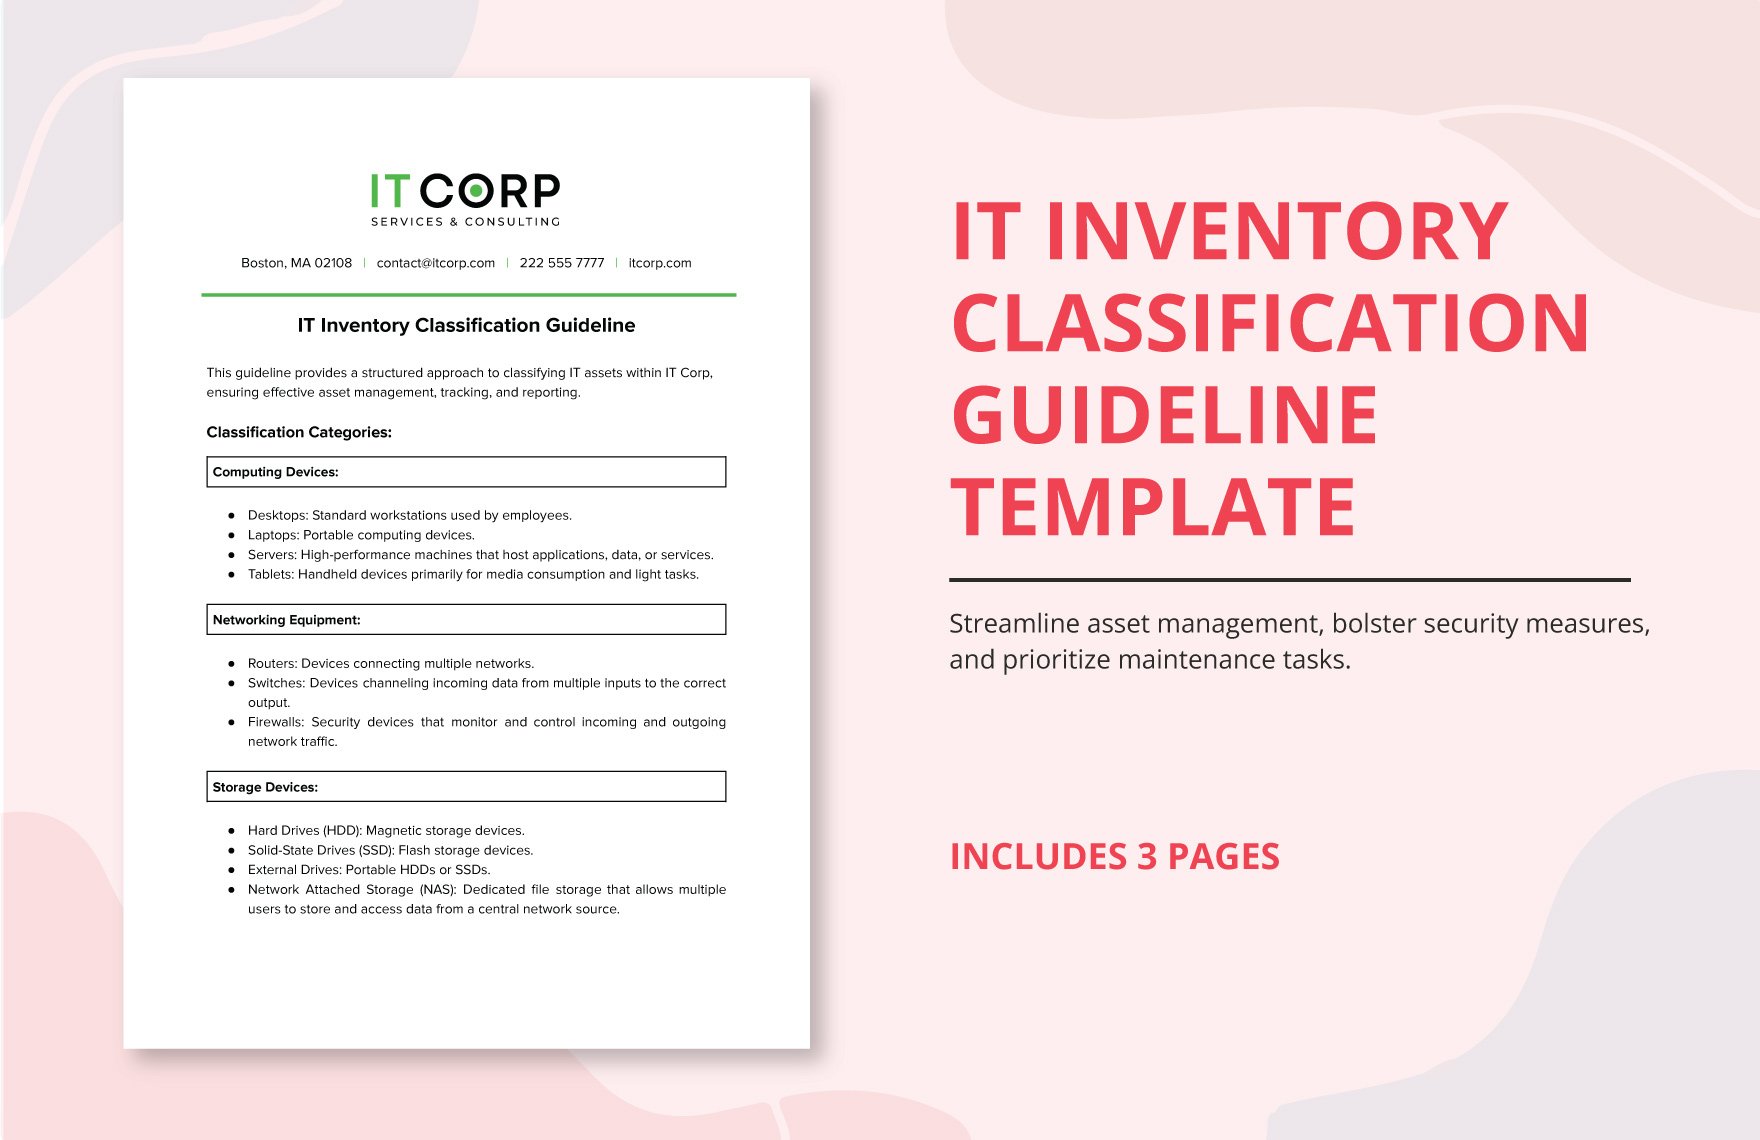 IT Inventory Classification Guideline Template